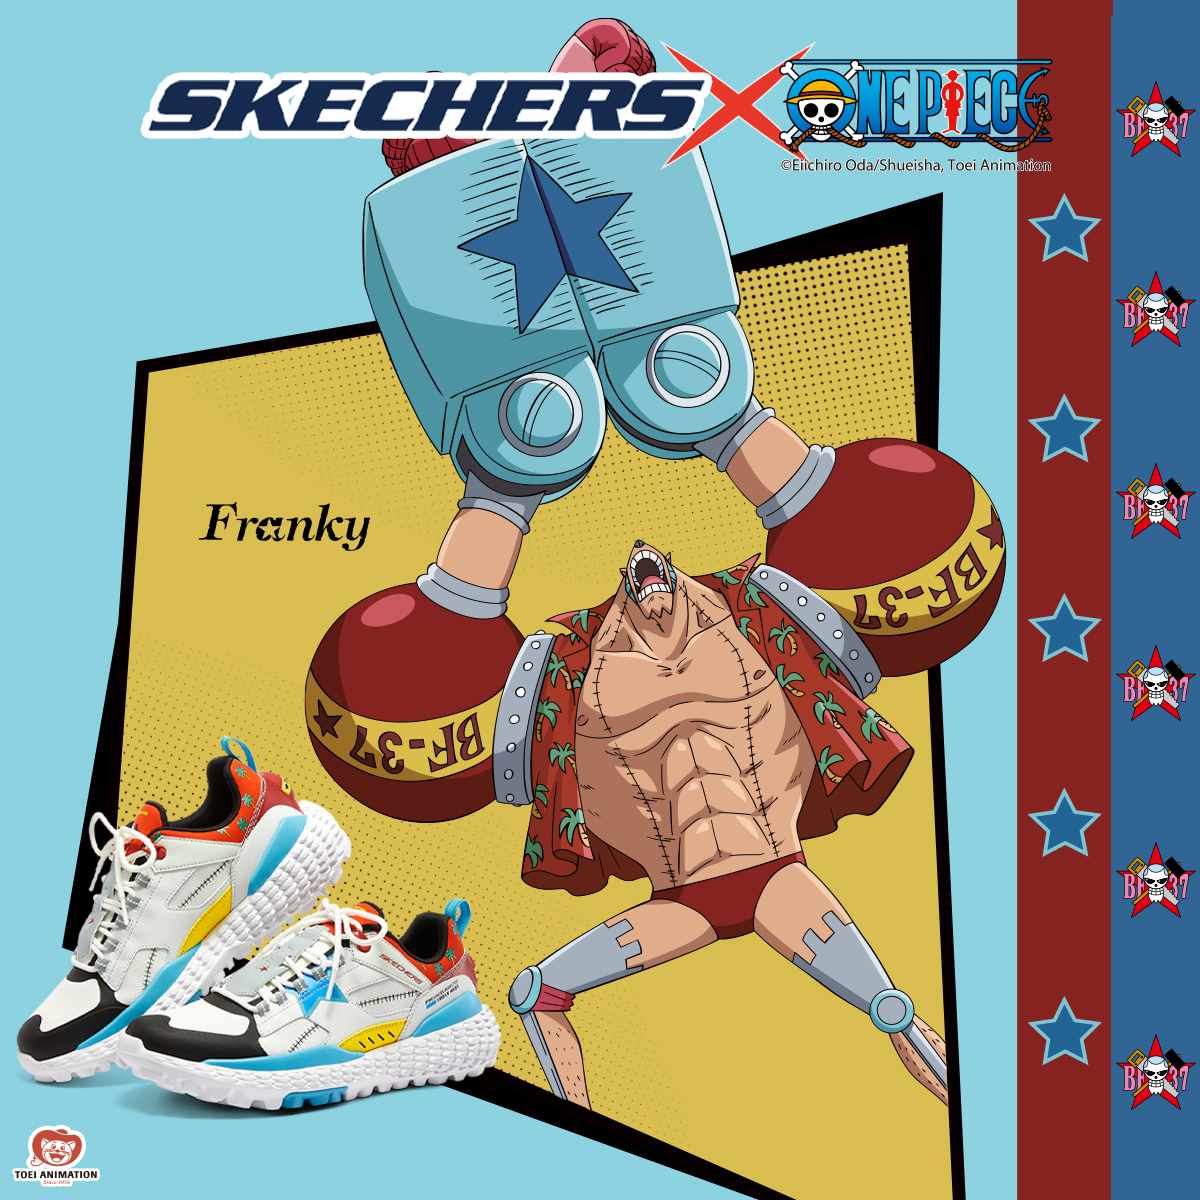 Skechers x One Piece Collection Featuring Franky - Skechers X One Piece 系列，动漫迷们的福音！